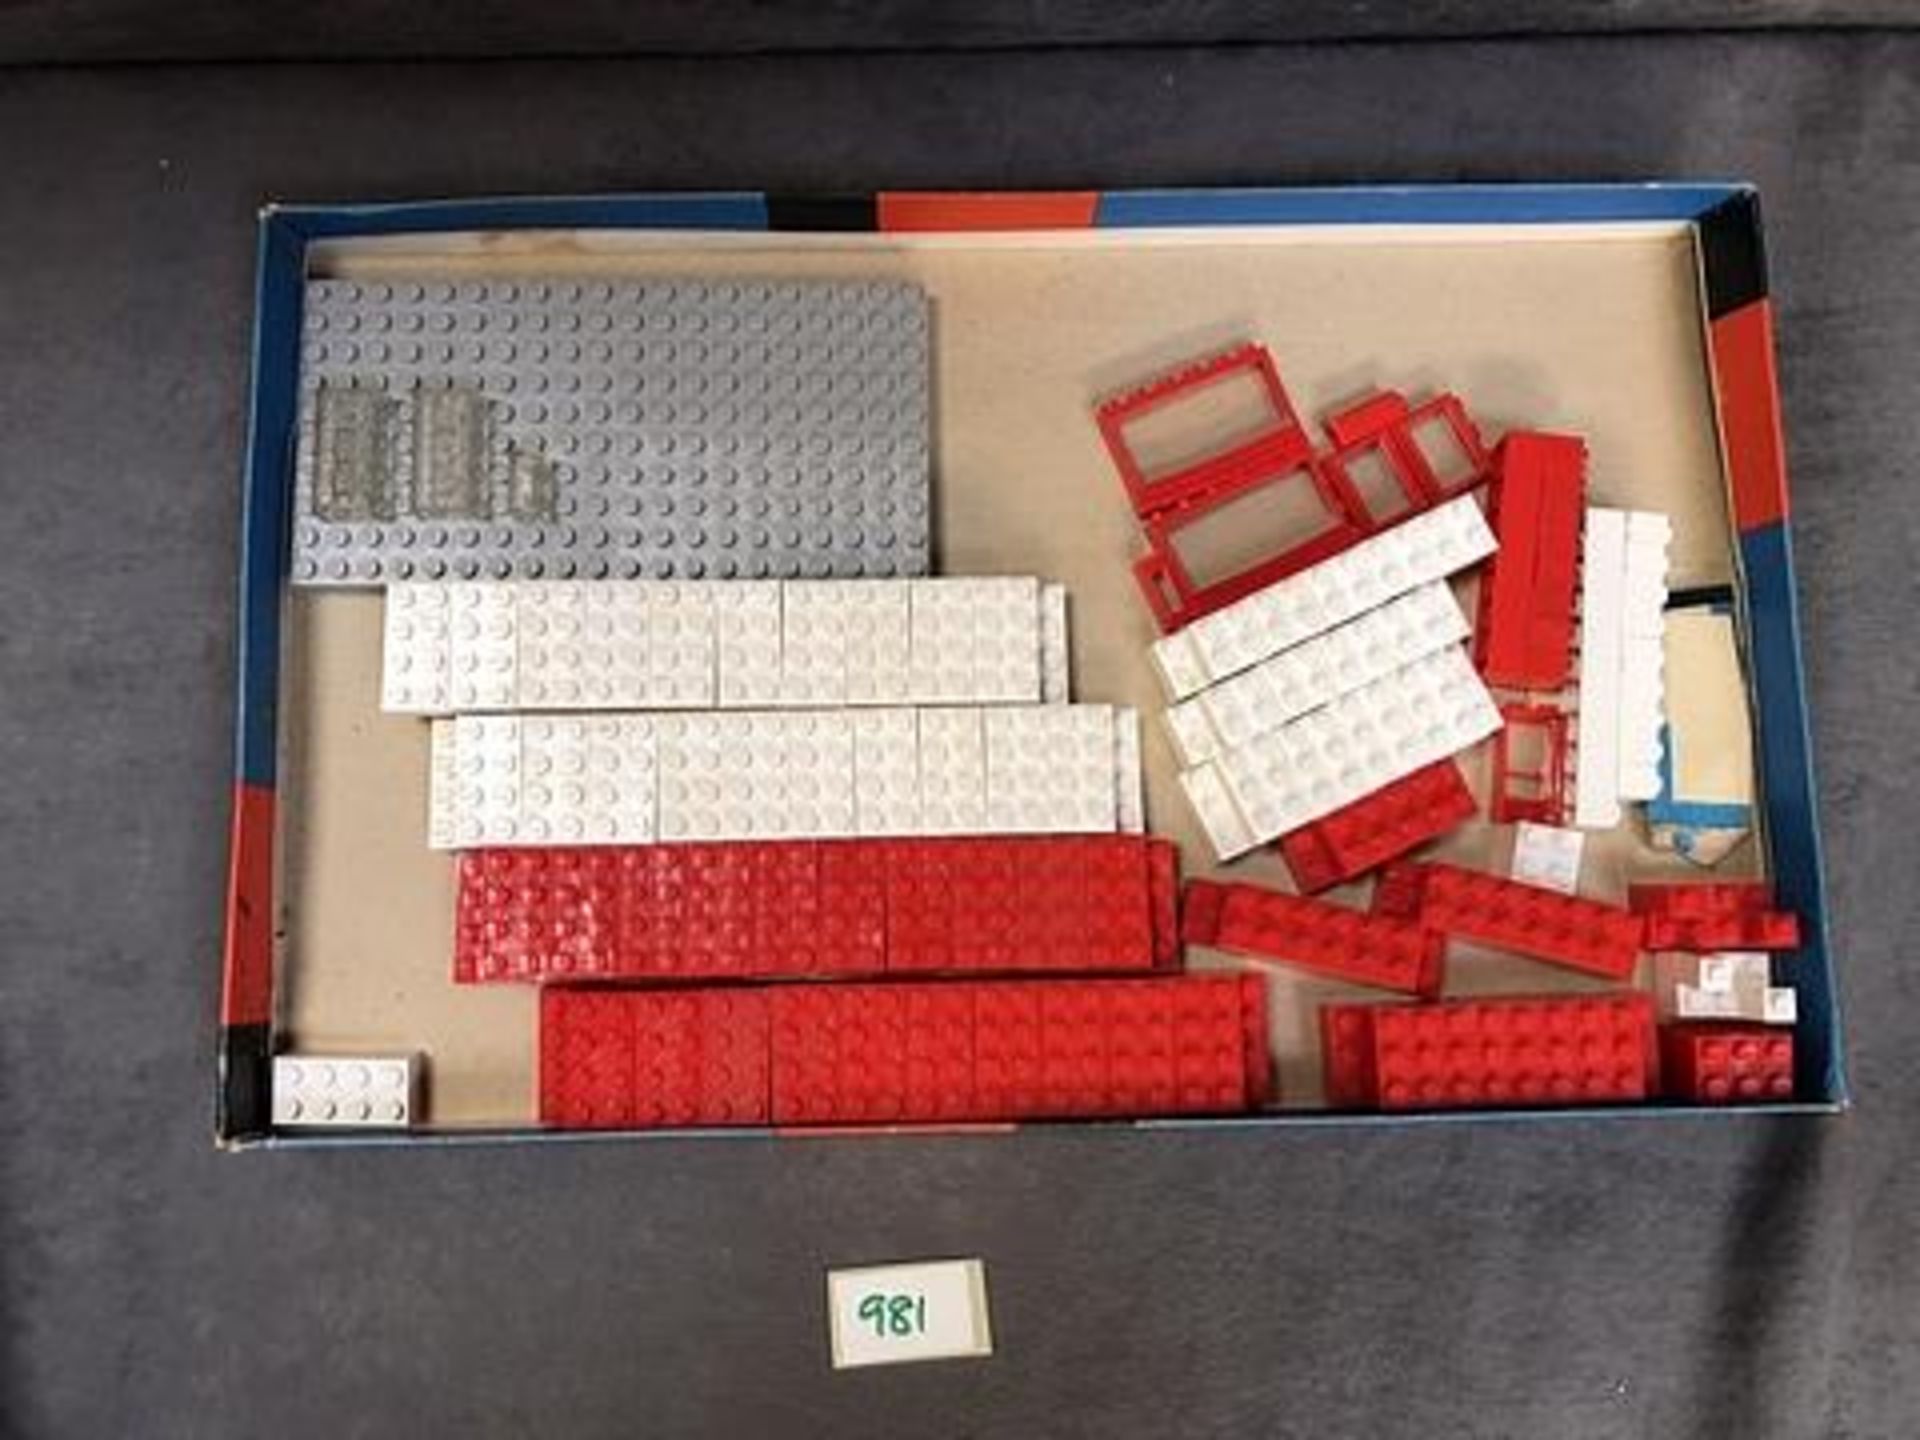 Lego Systems 700/1 The First Basic LEGO Sets Produced From 1960-65 Complete With Box - Image 2 of 2